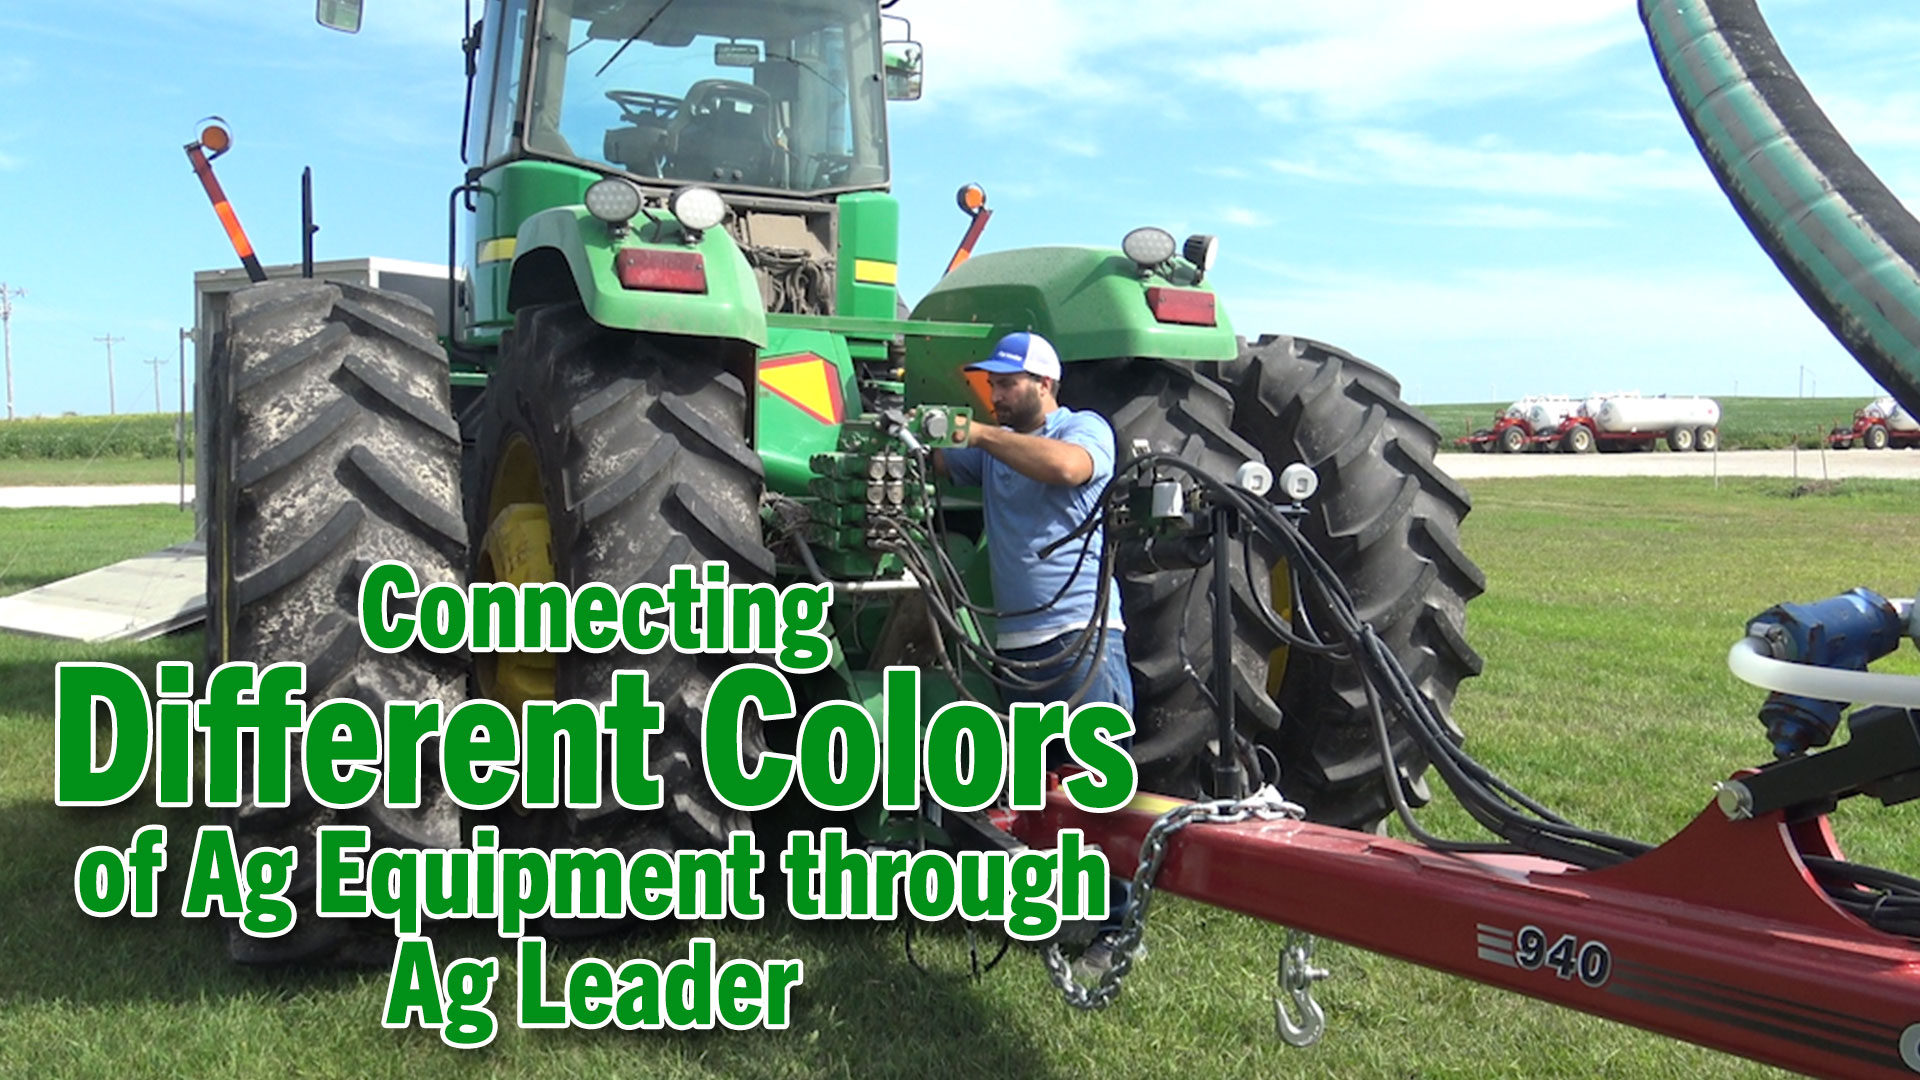 Connecting-Different-Colors-of-Ag-Equipment-through-Ag-Leader.jpg